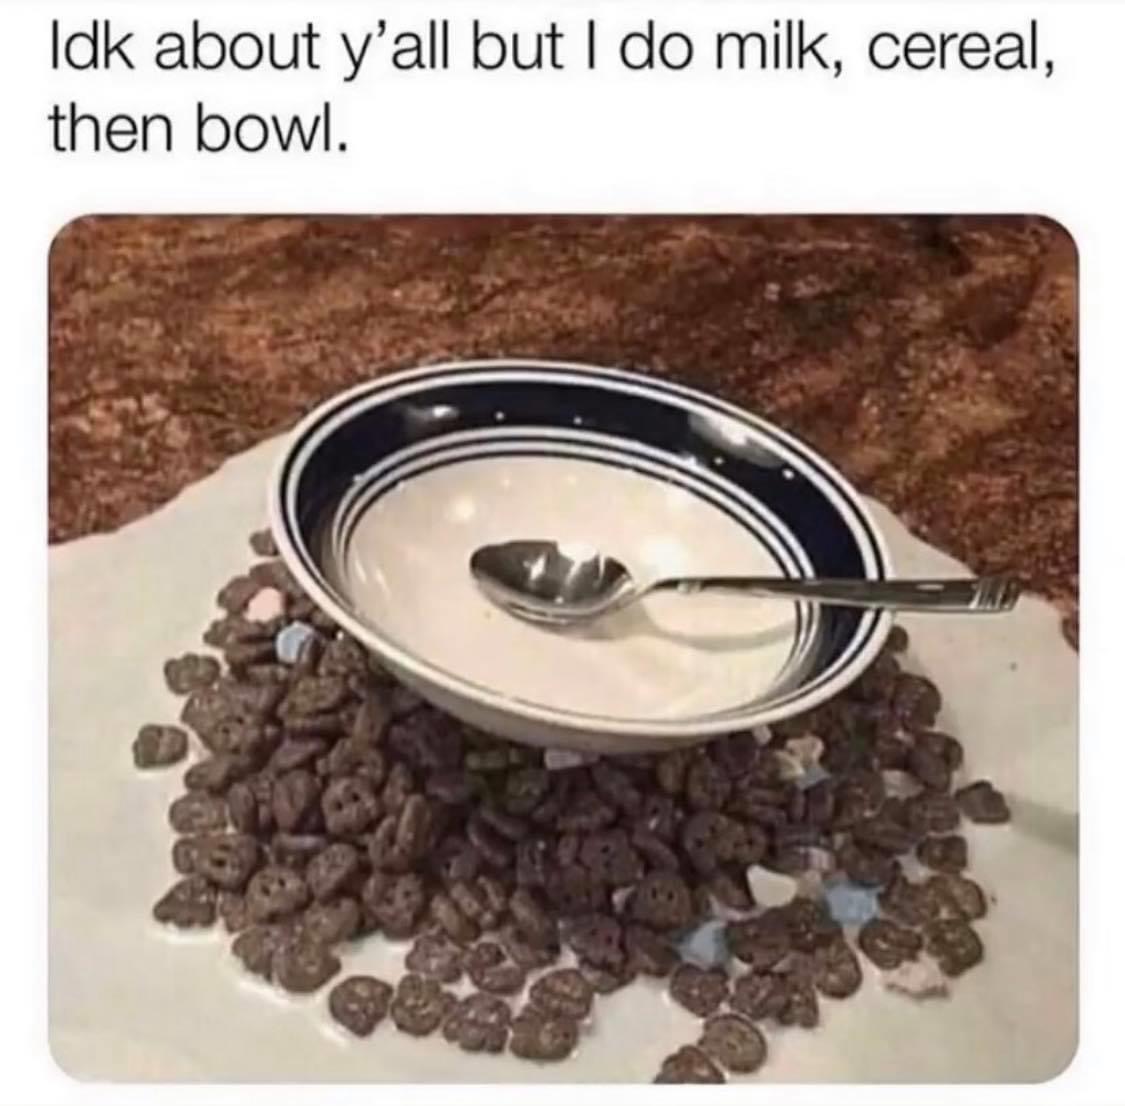 milk then cereal then bowl - Idk about y'all but I do milk, cereal, then bowl.